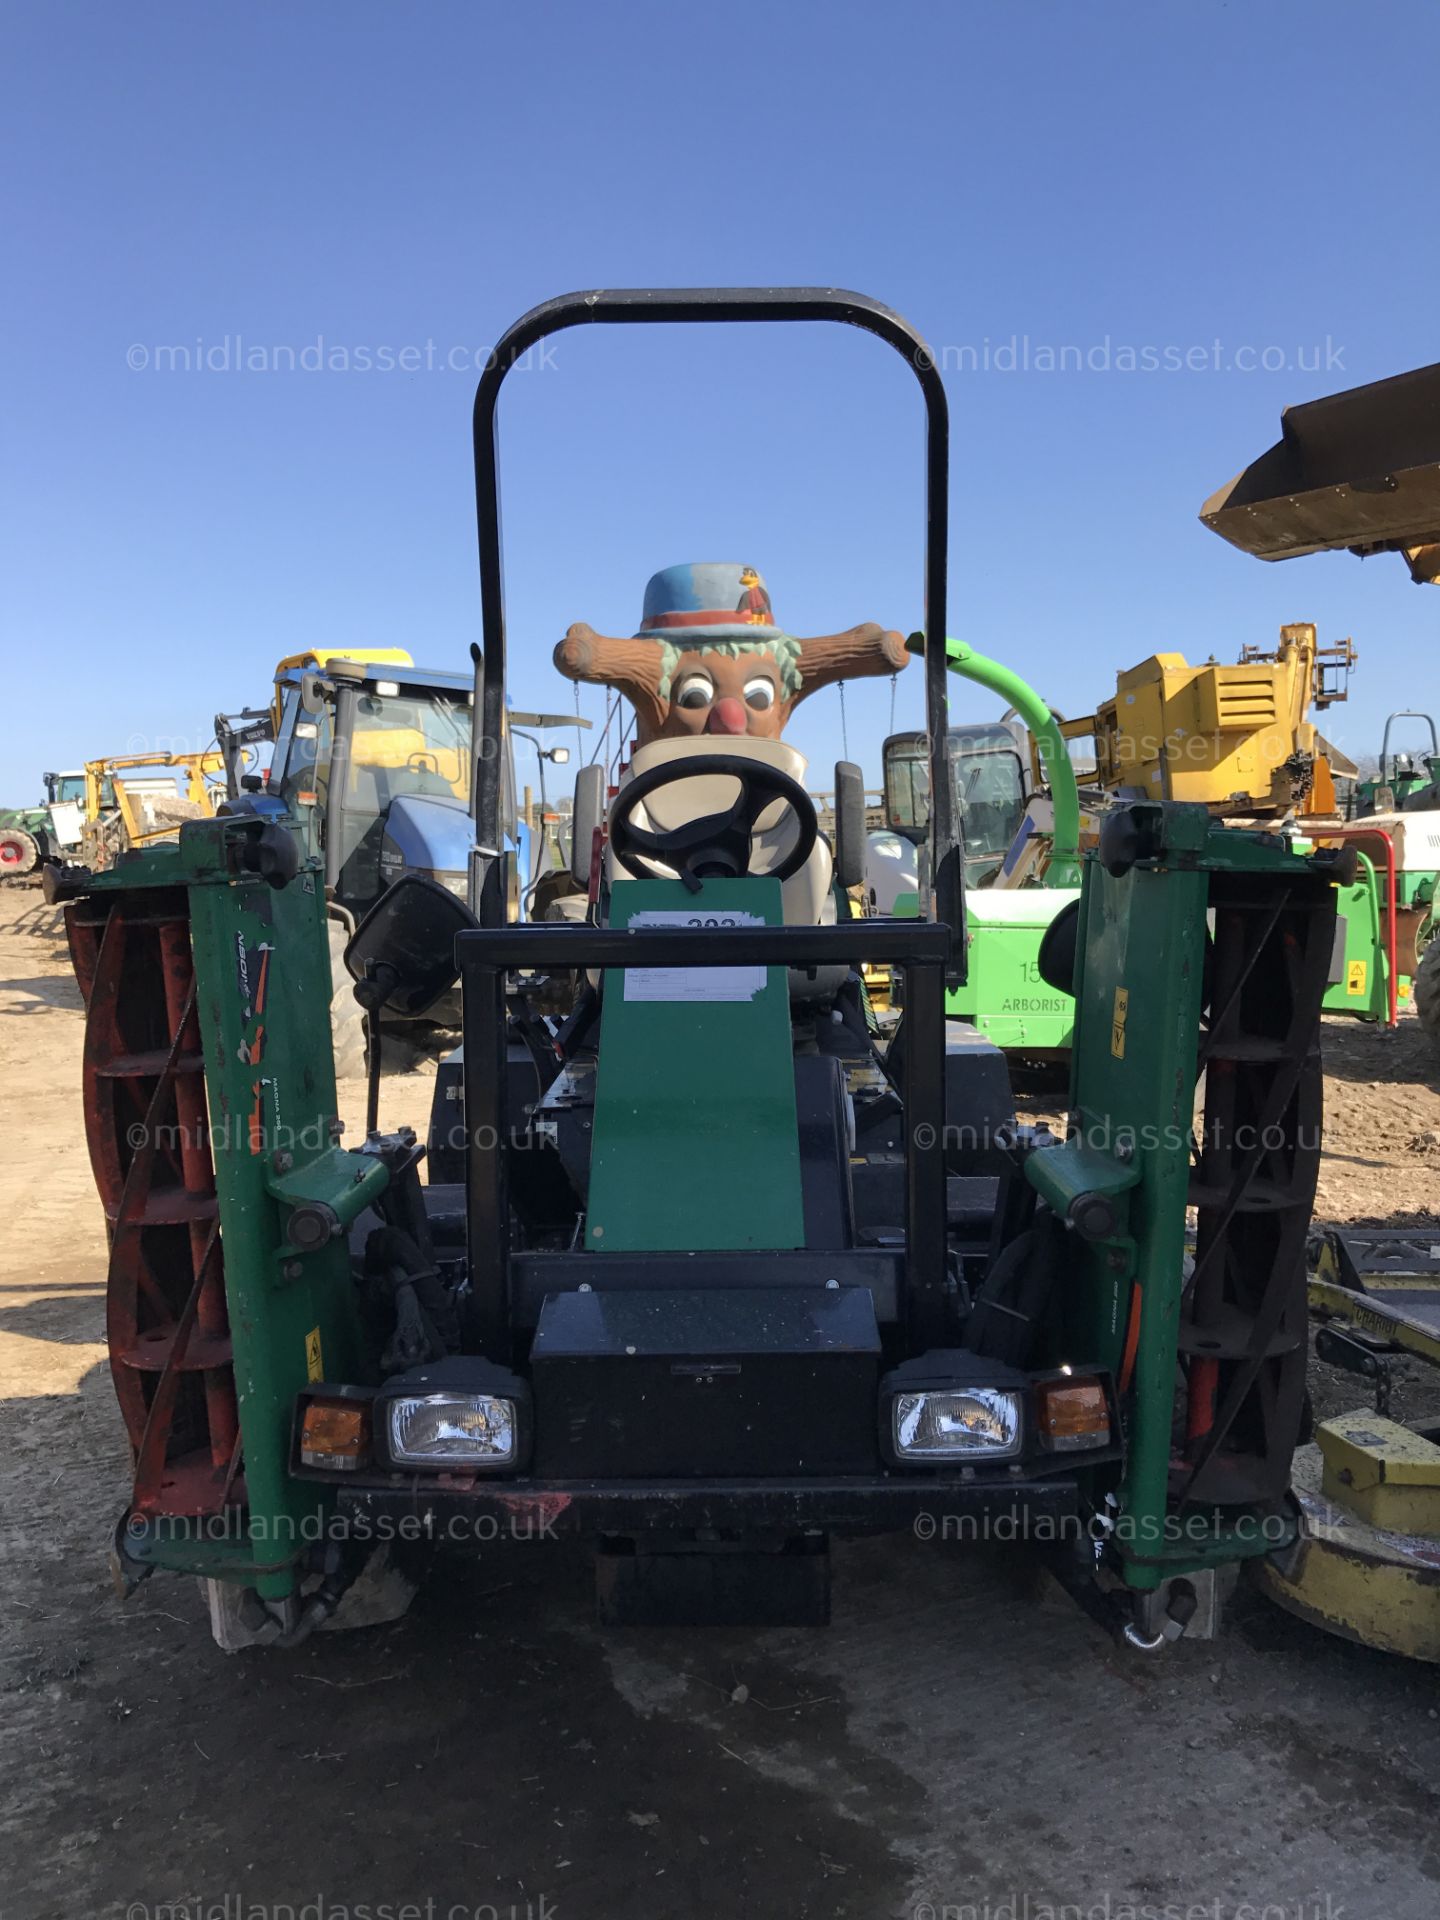 2010 RANSOMES PARKWAY 2250 4wd PLUS THREE GANG MOWER - Image 2 of 6